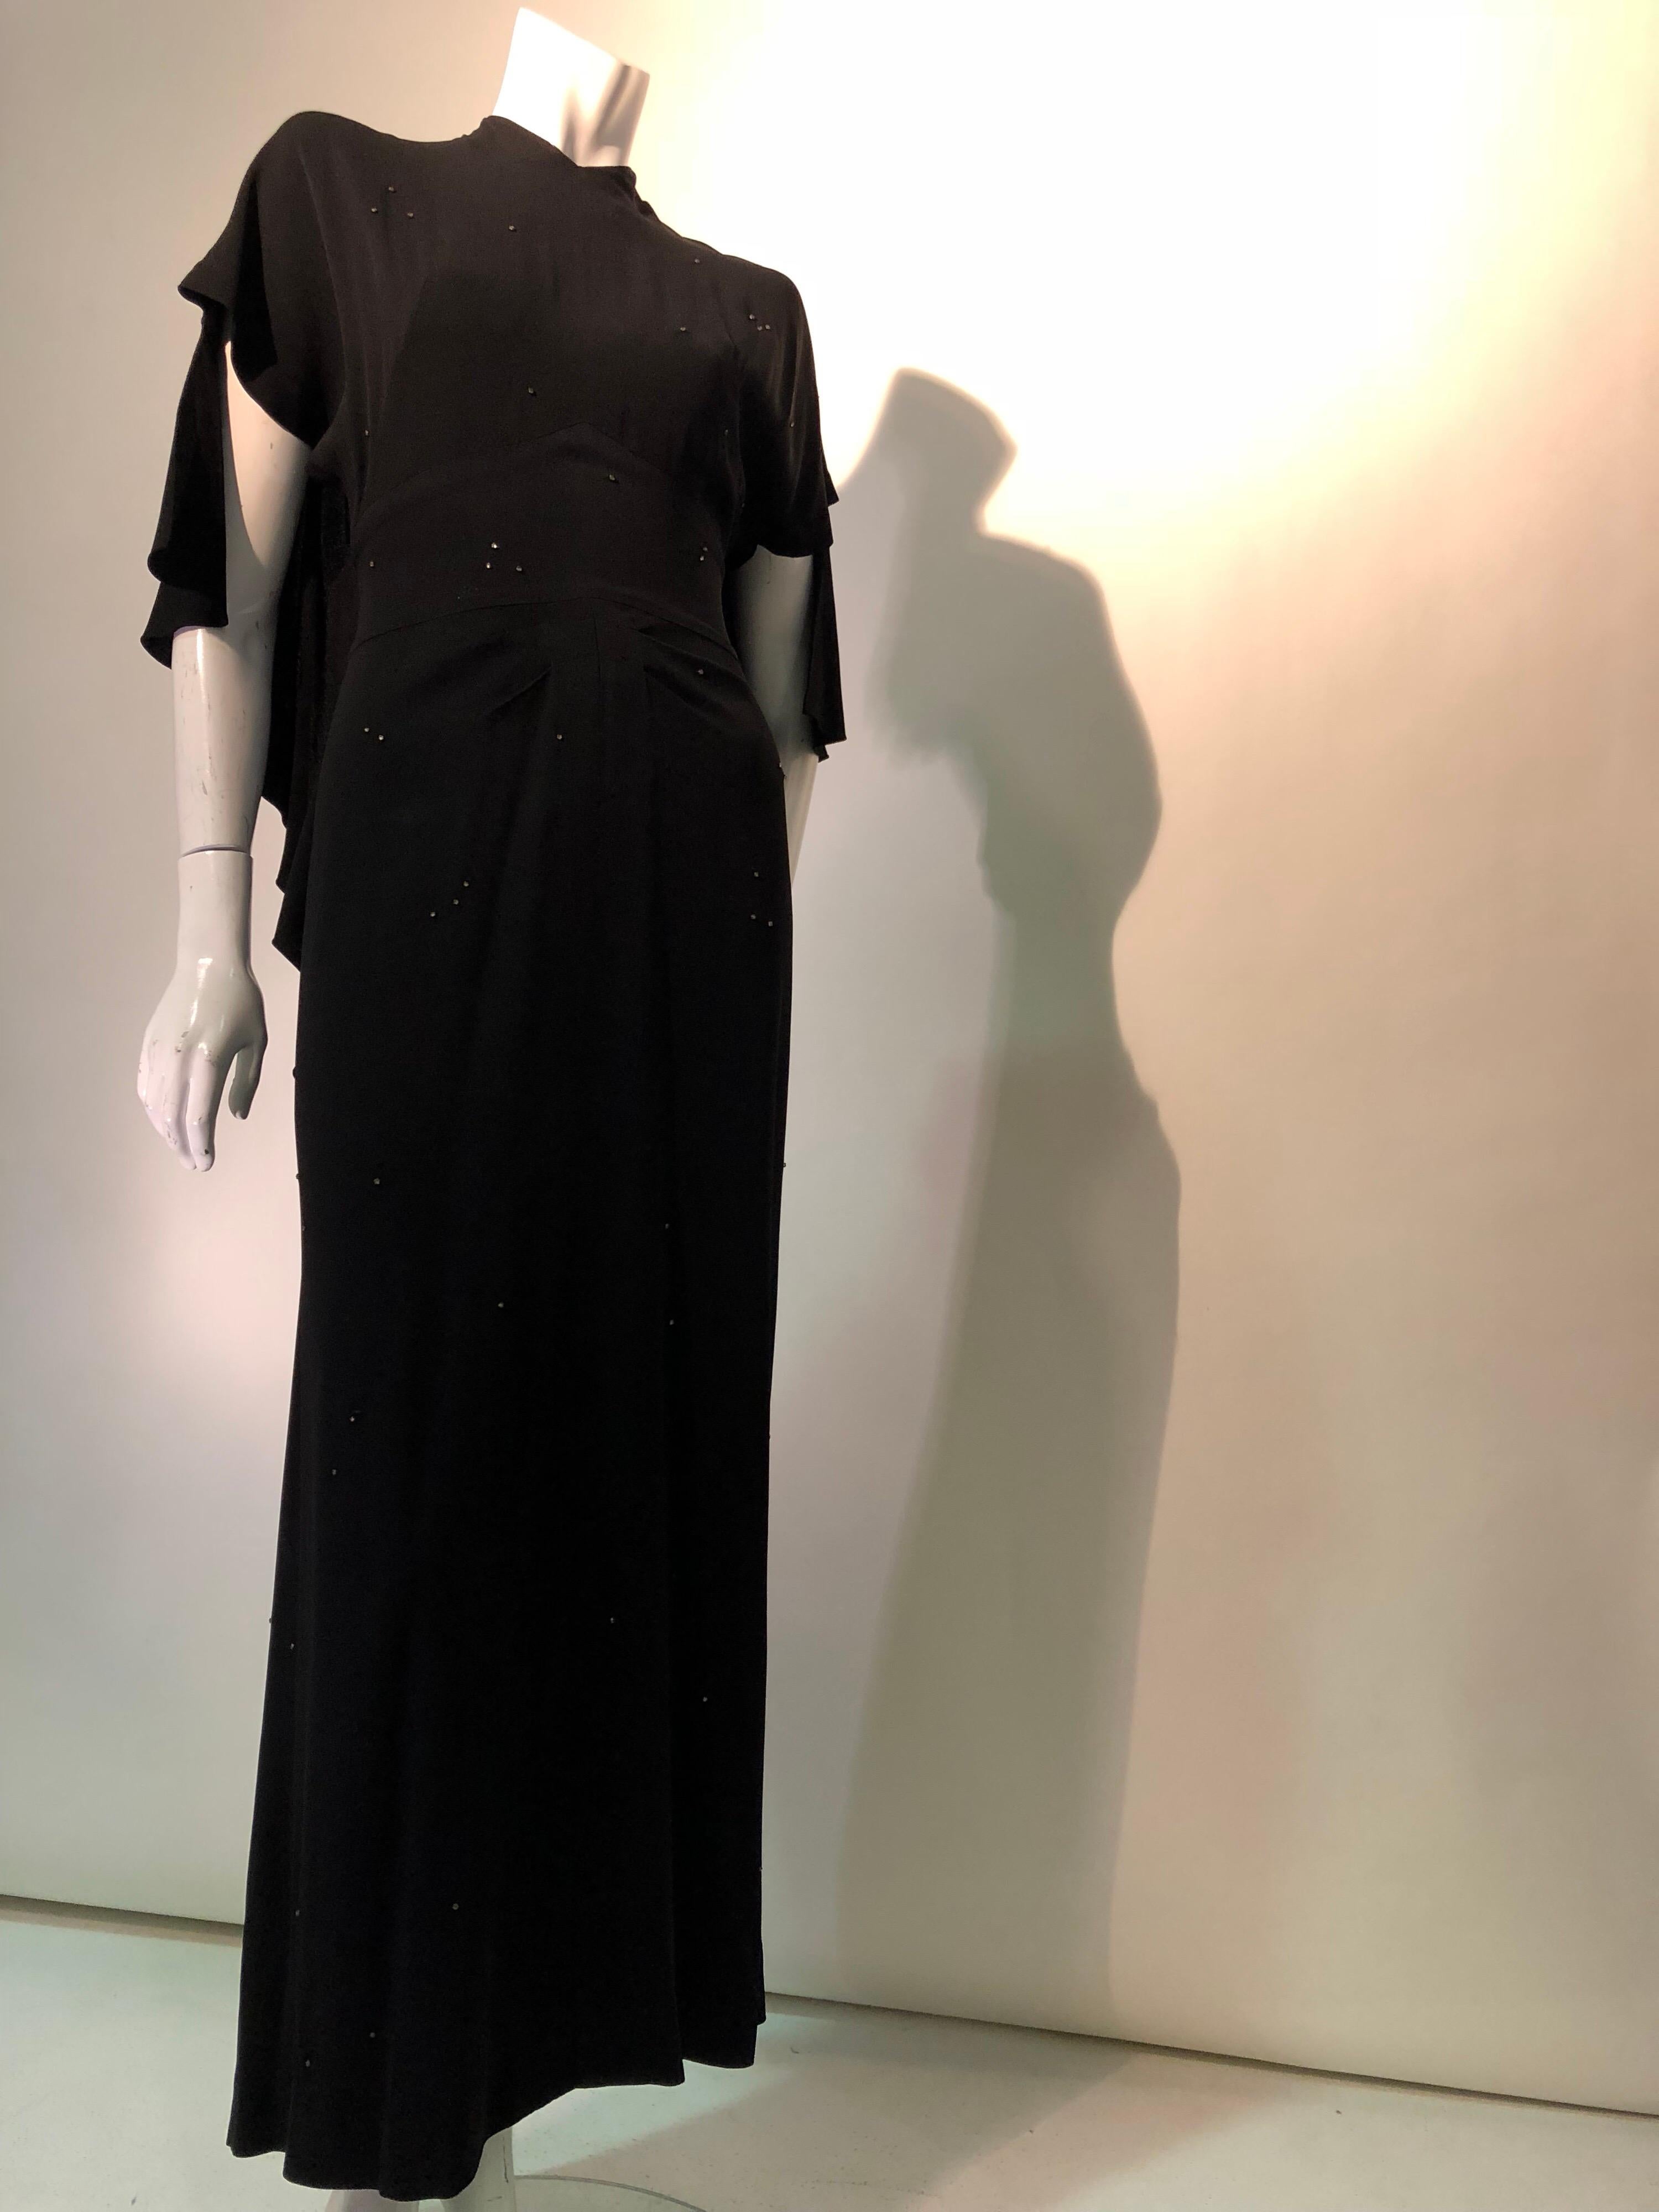 Women's Gilbert Adrian Black Crepe Gown With Shoulder Drape / Back and Front Slit, 1940 For Sale